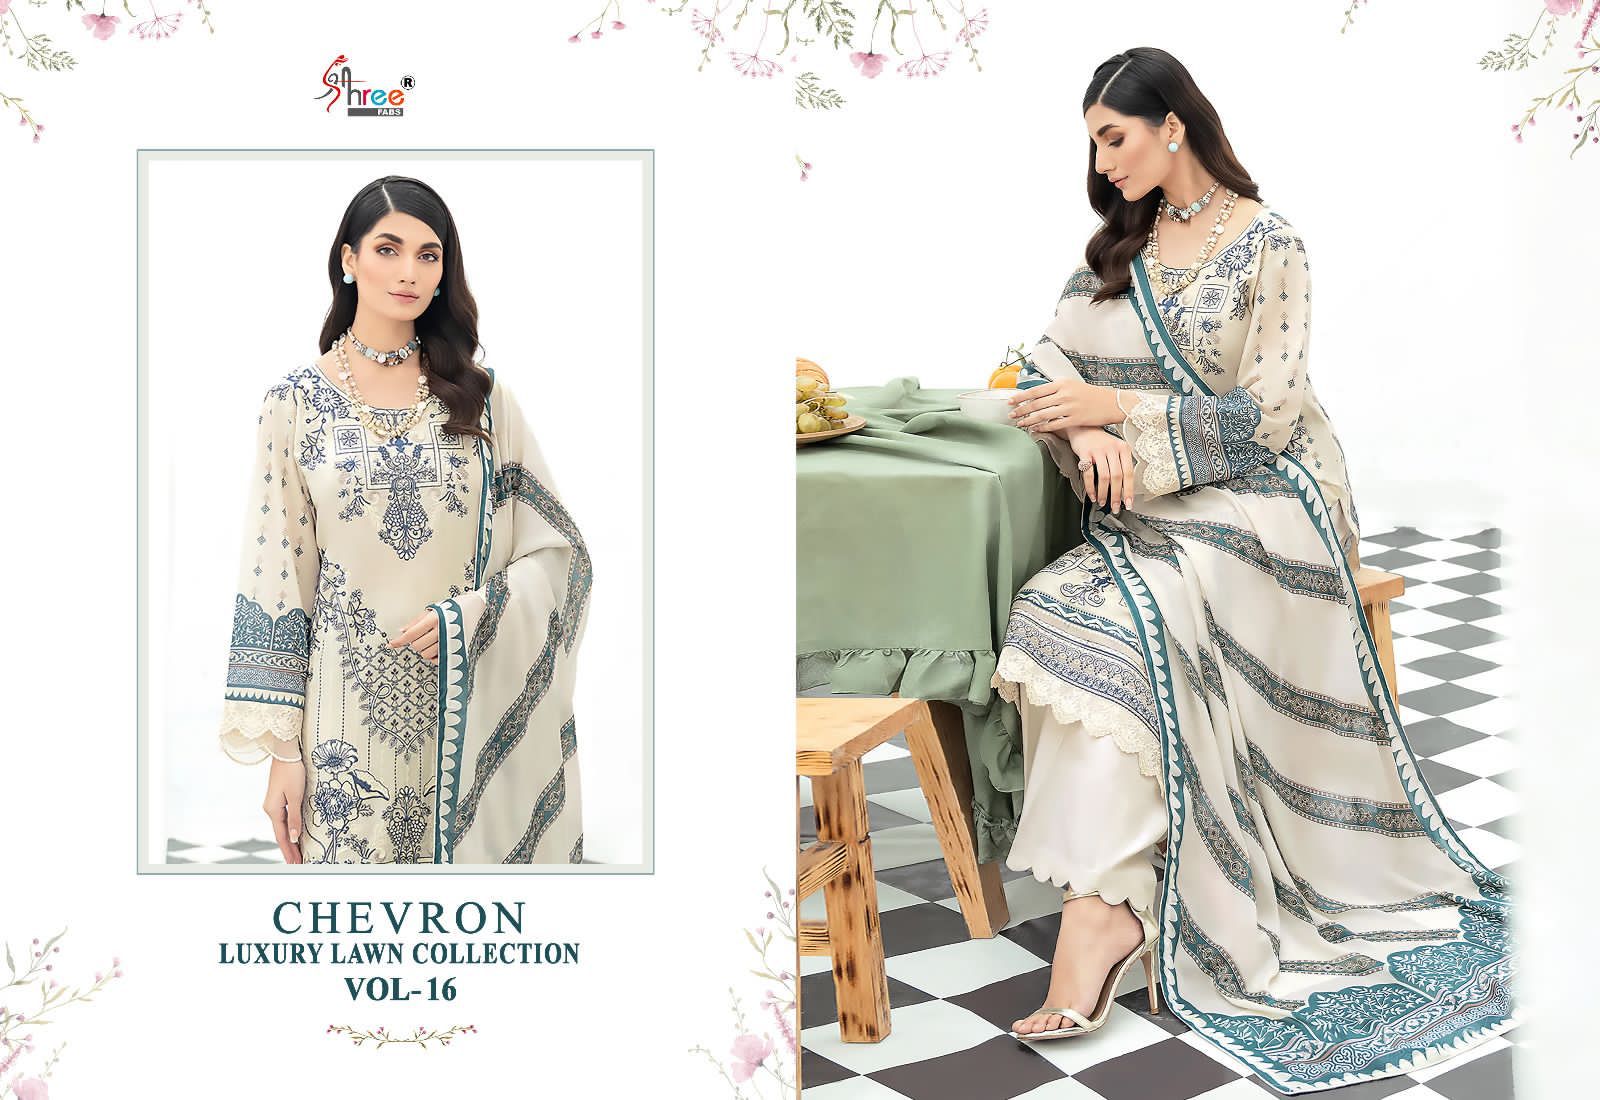 Shree Chevron Luxury Lawn Collection Vol 16 collection 5